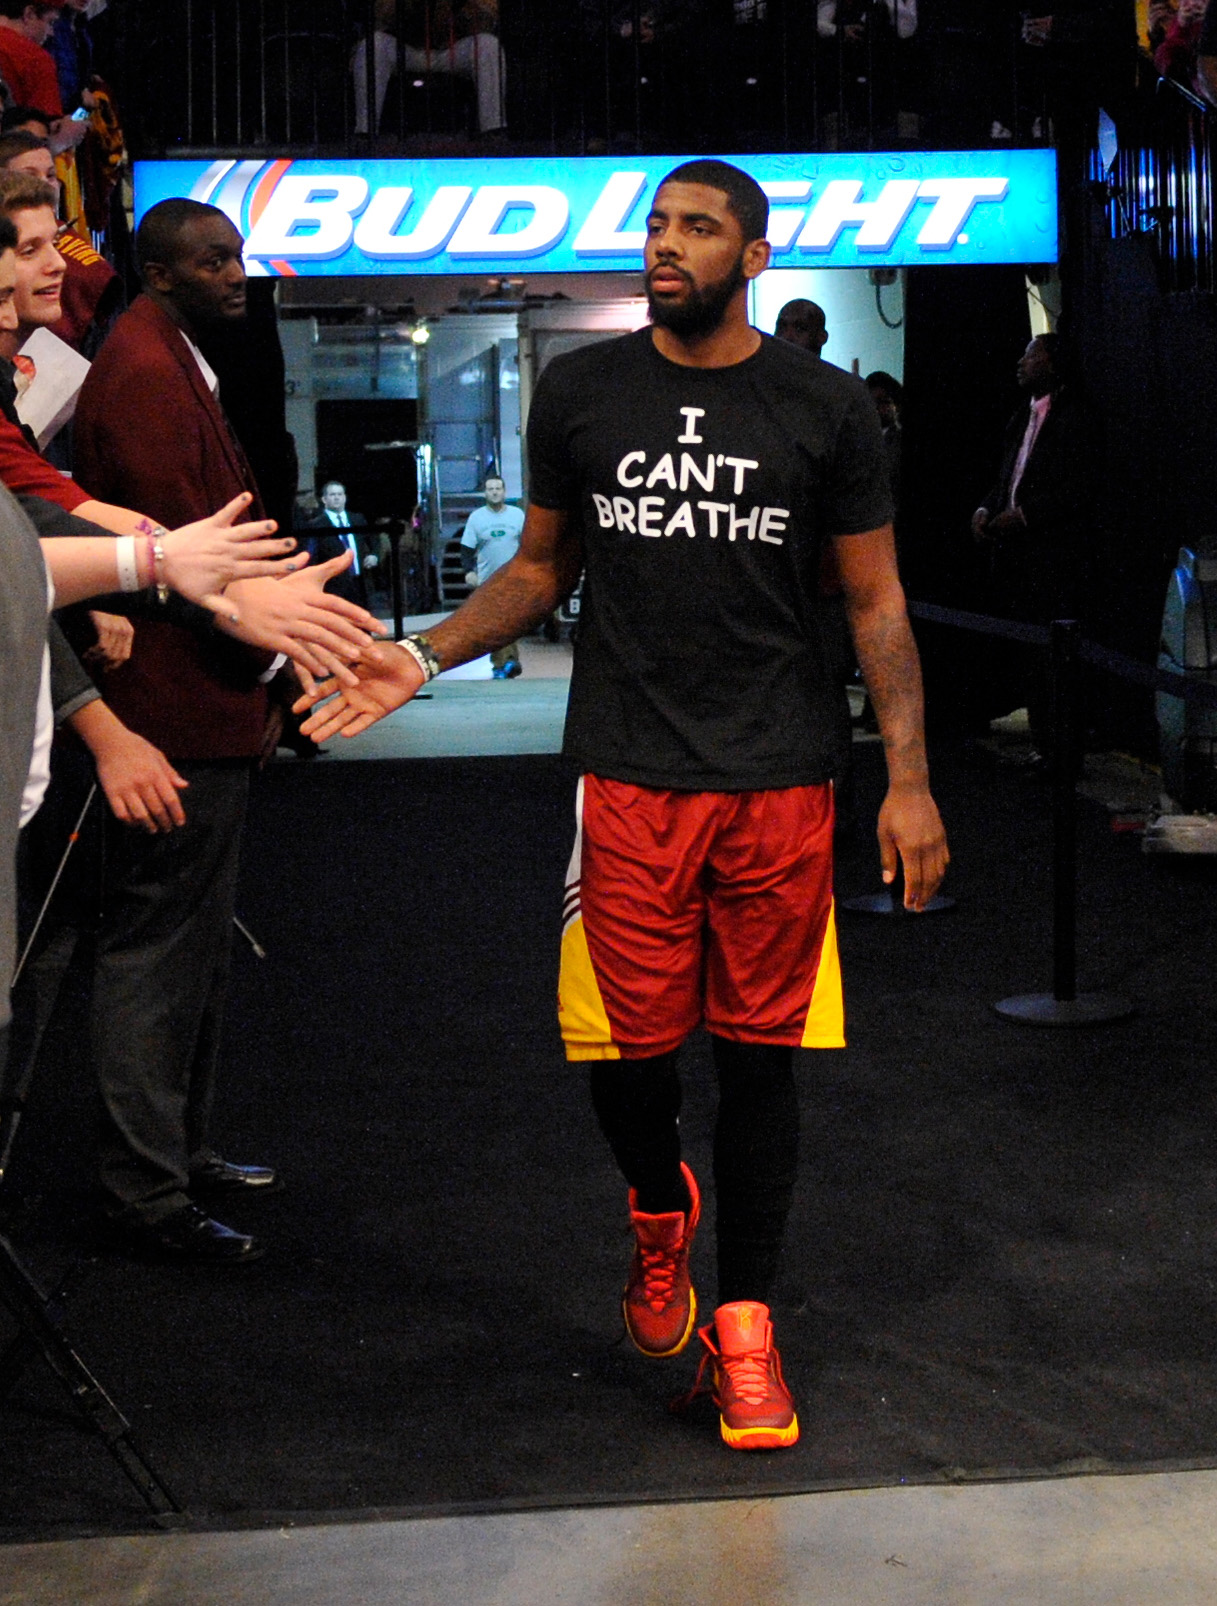 LeBron James: NBA Player Wears 'I Can't Breathe' Shirt During Warm-Ups